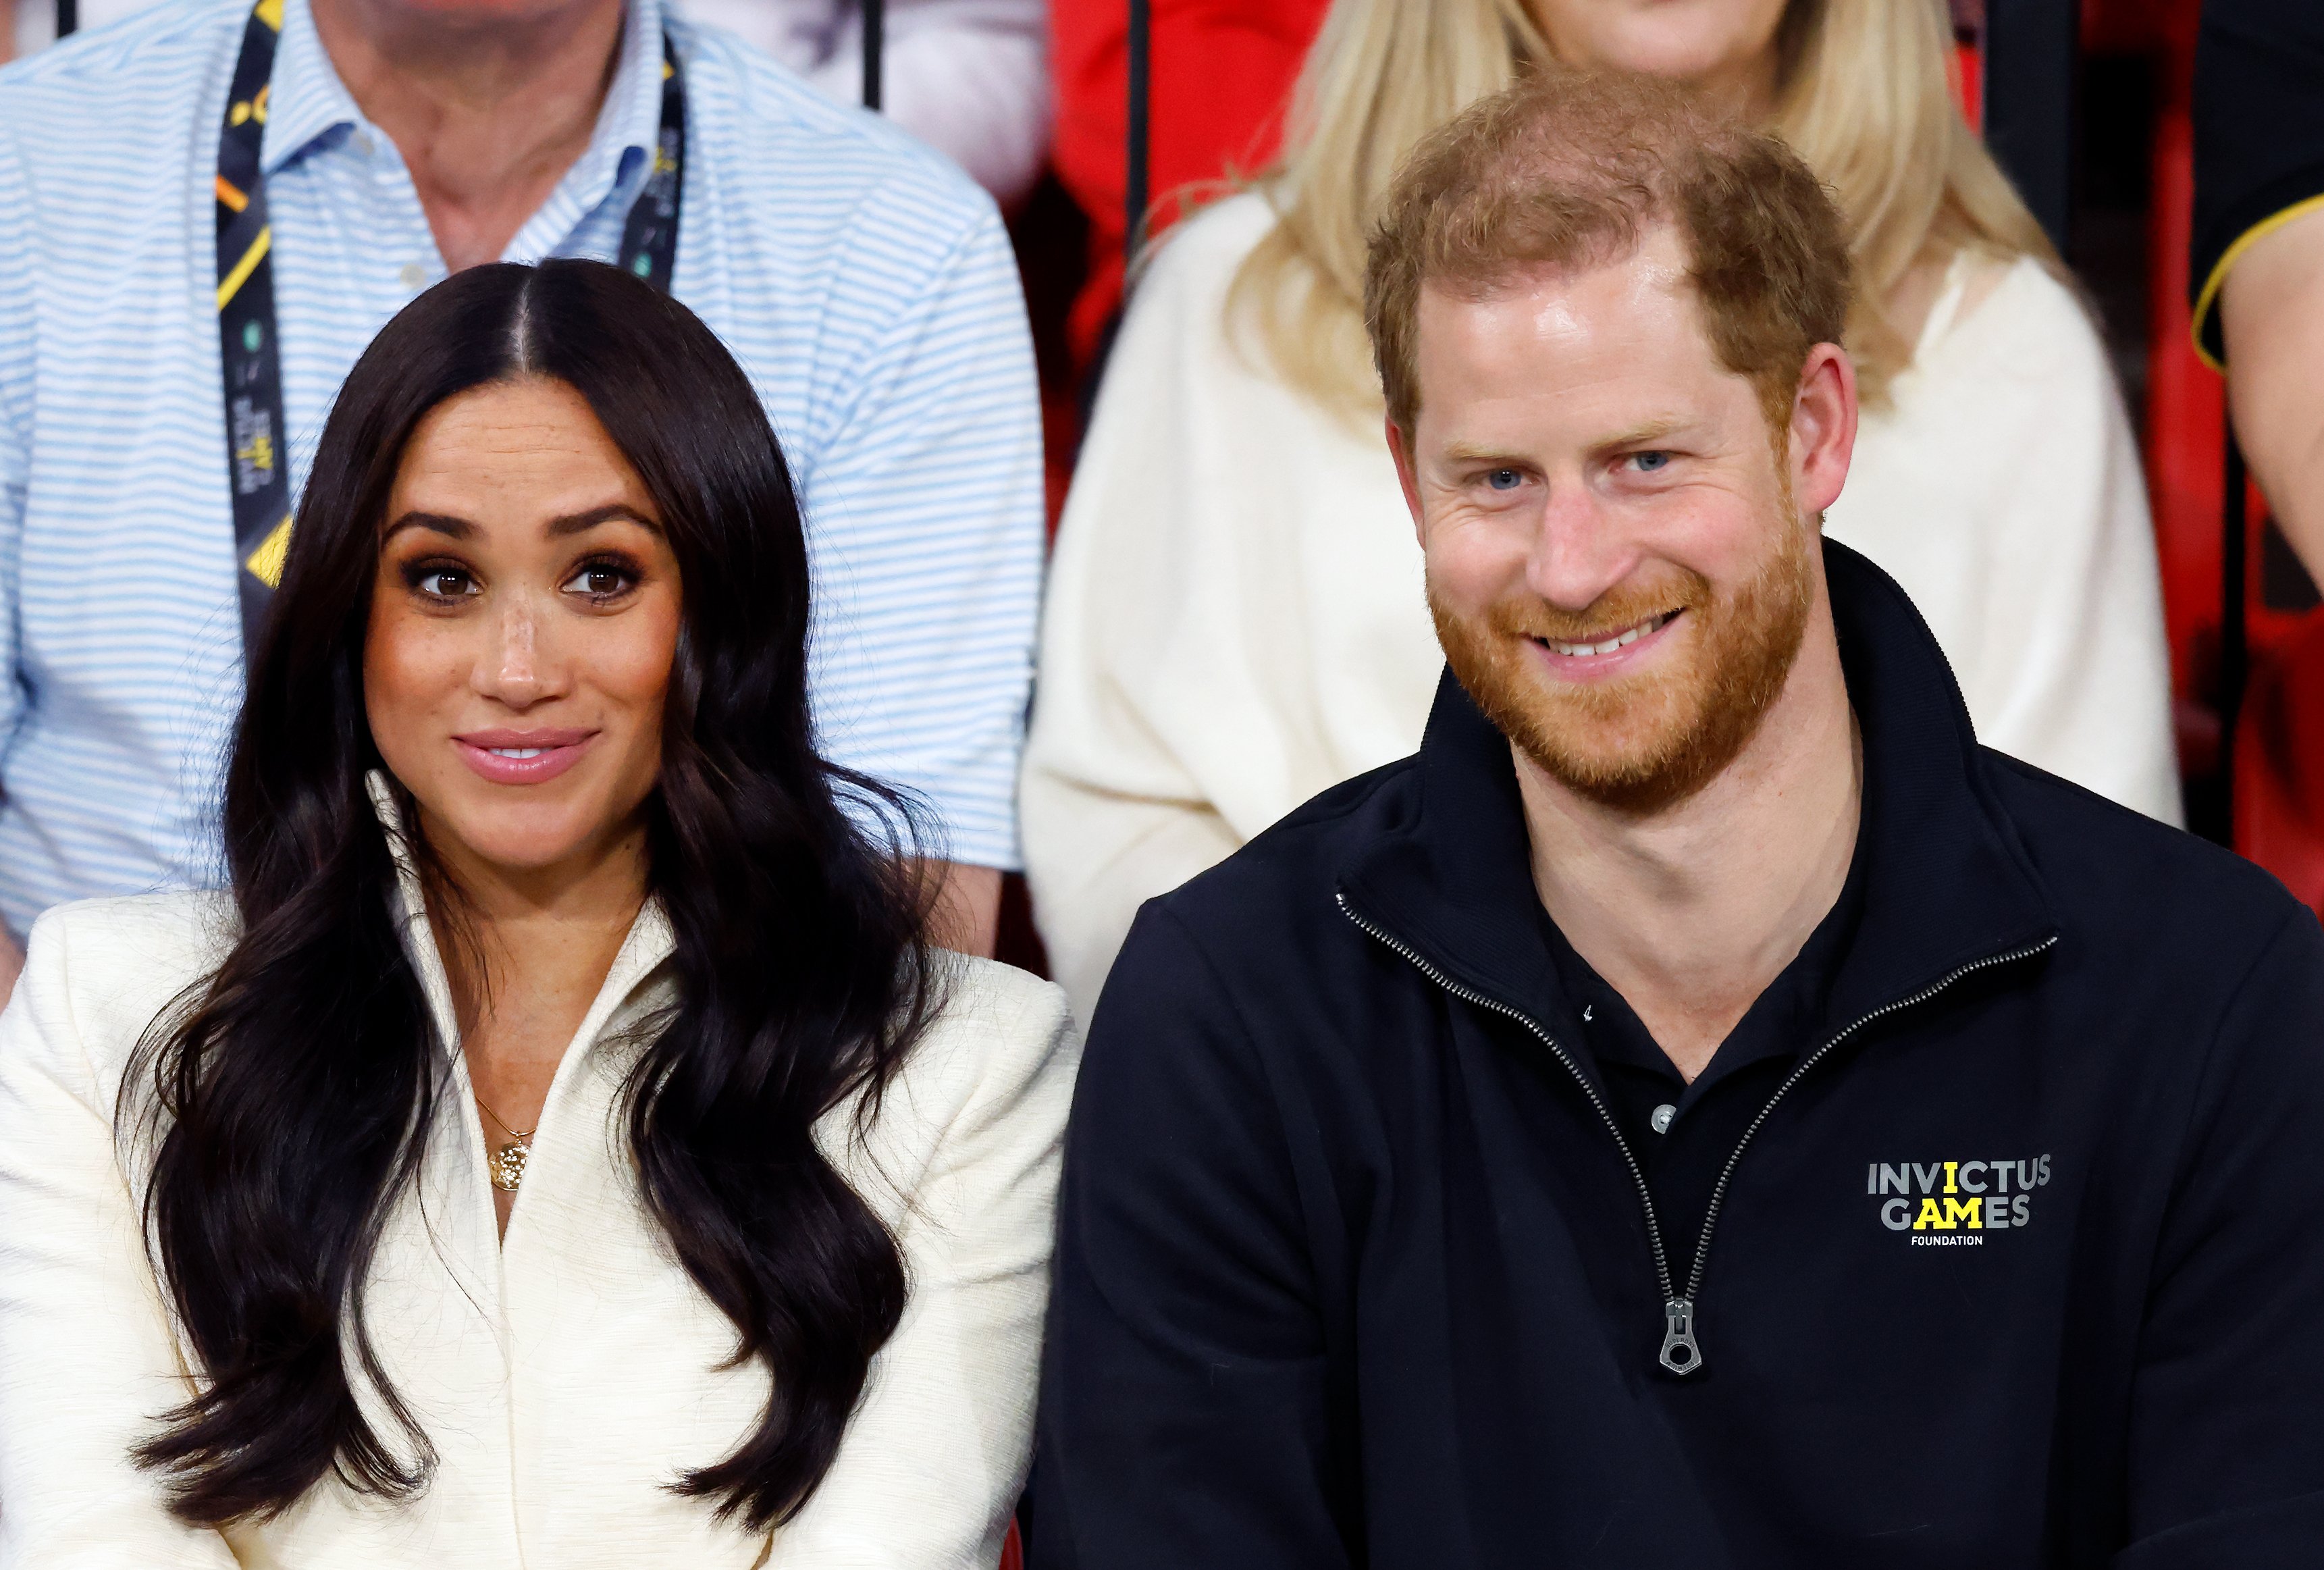 Meghan, Duchess of Sussex and Prince Harry, Duke of Sussex watch the sitting volley ball competition on day 2 of the Invictus Games 2020 at Zuiderpark on April 17, 2022 in The Hague, Netherlands. | Source: Getty Images